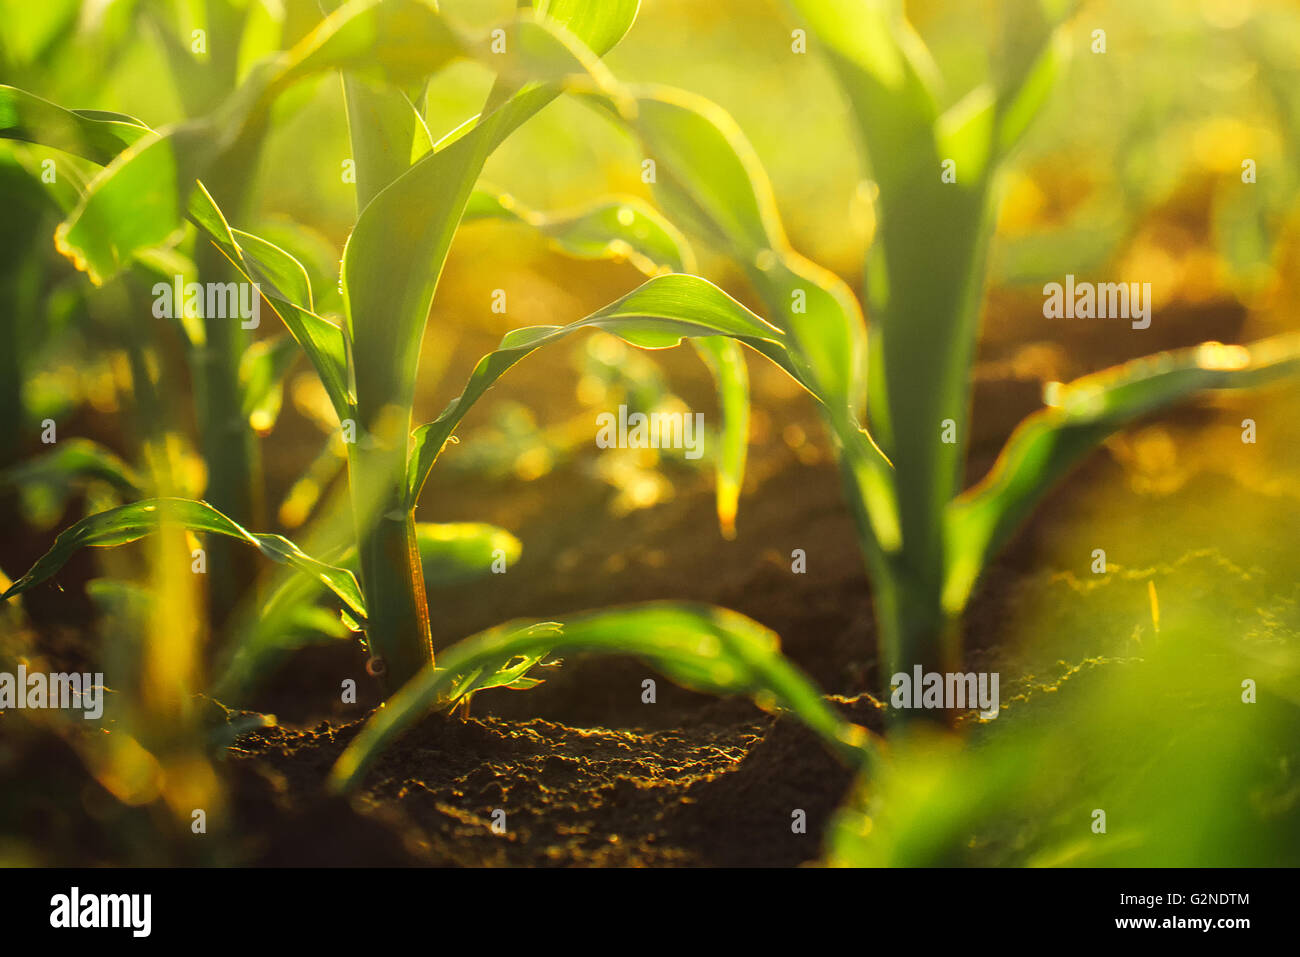 Corn crops growing in field, sunlight flare, selective focus Stock Photo